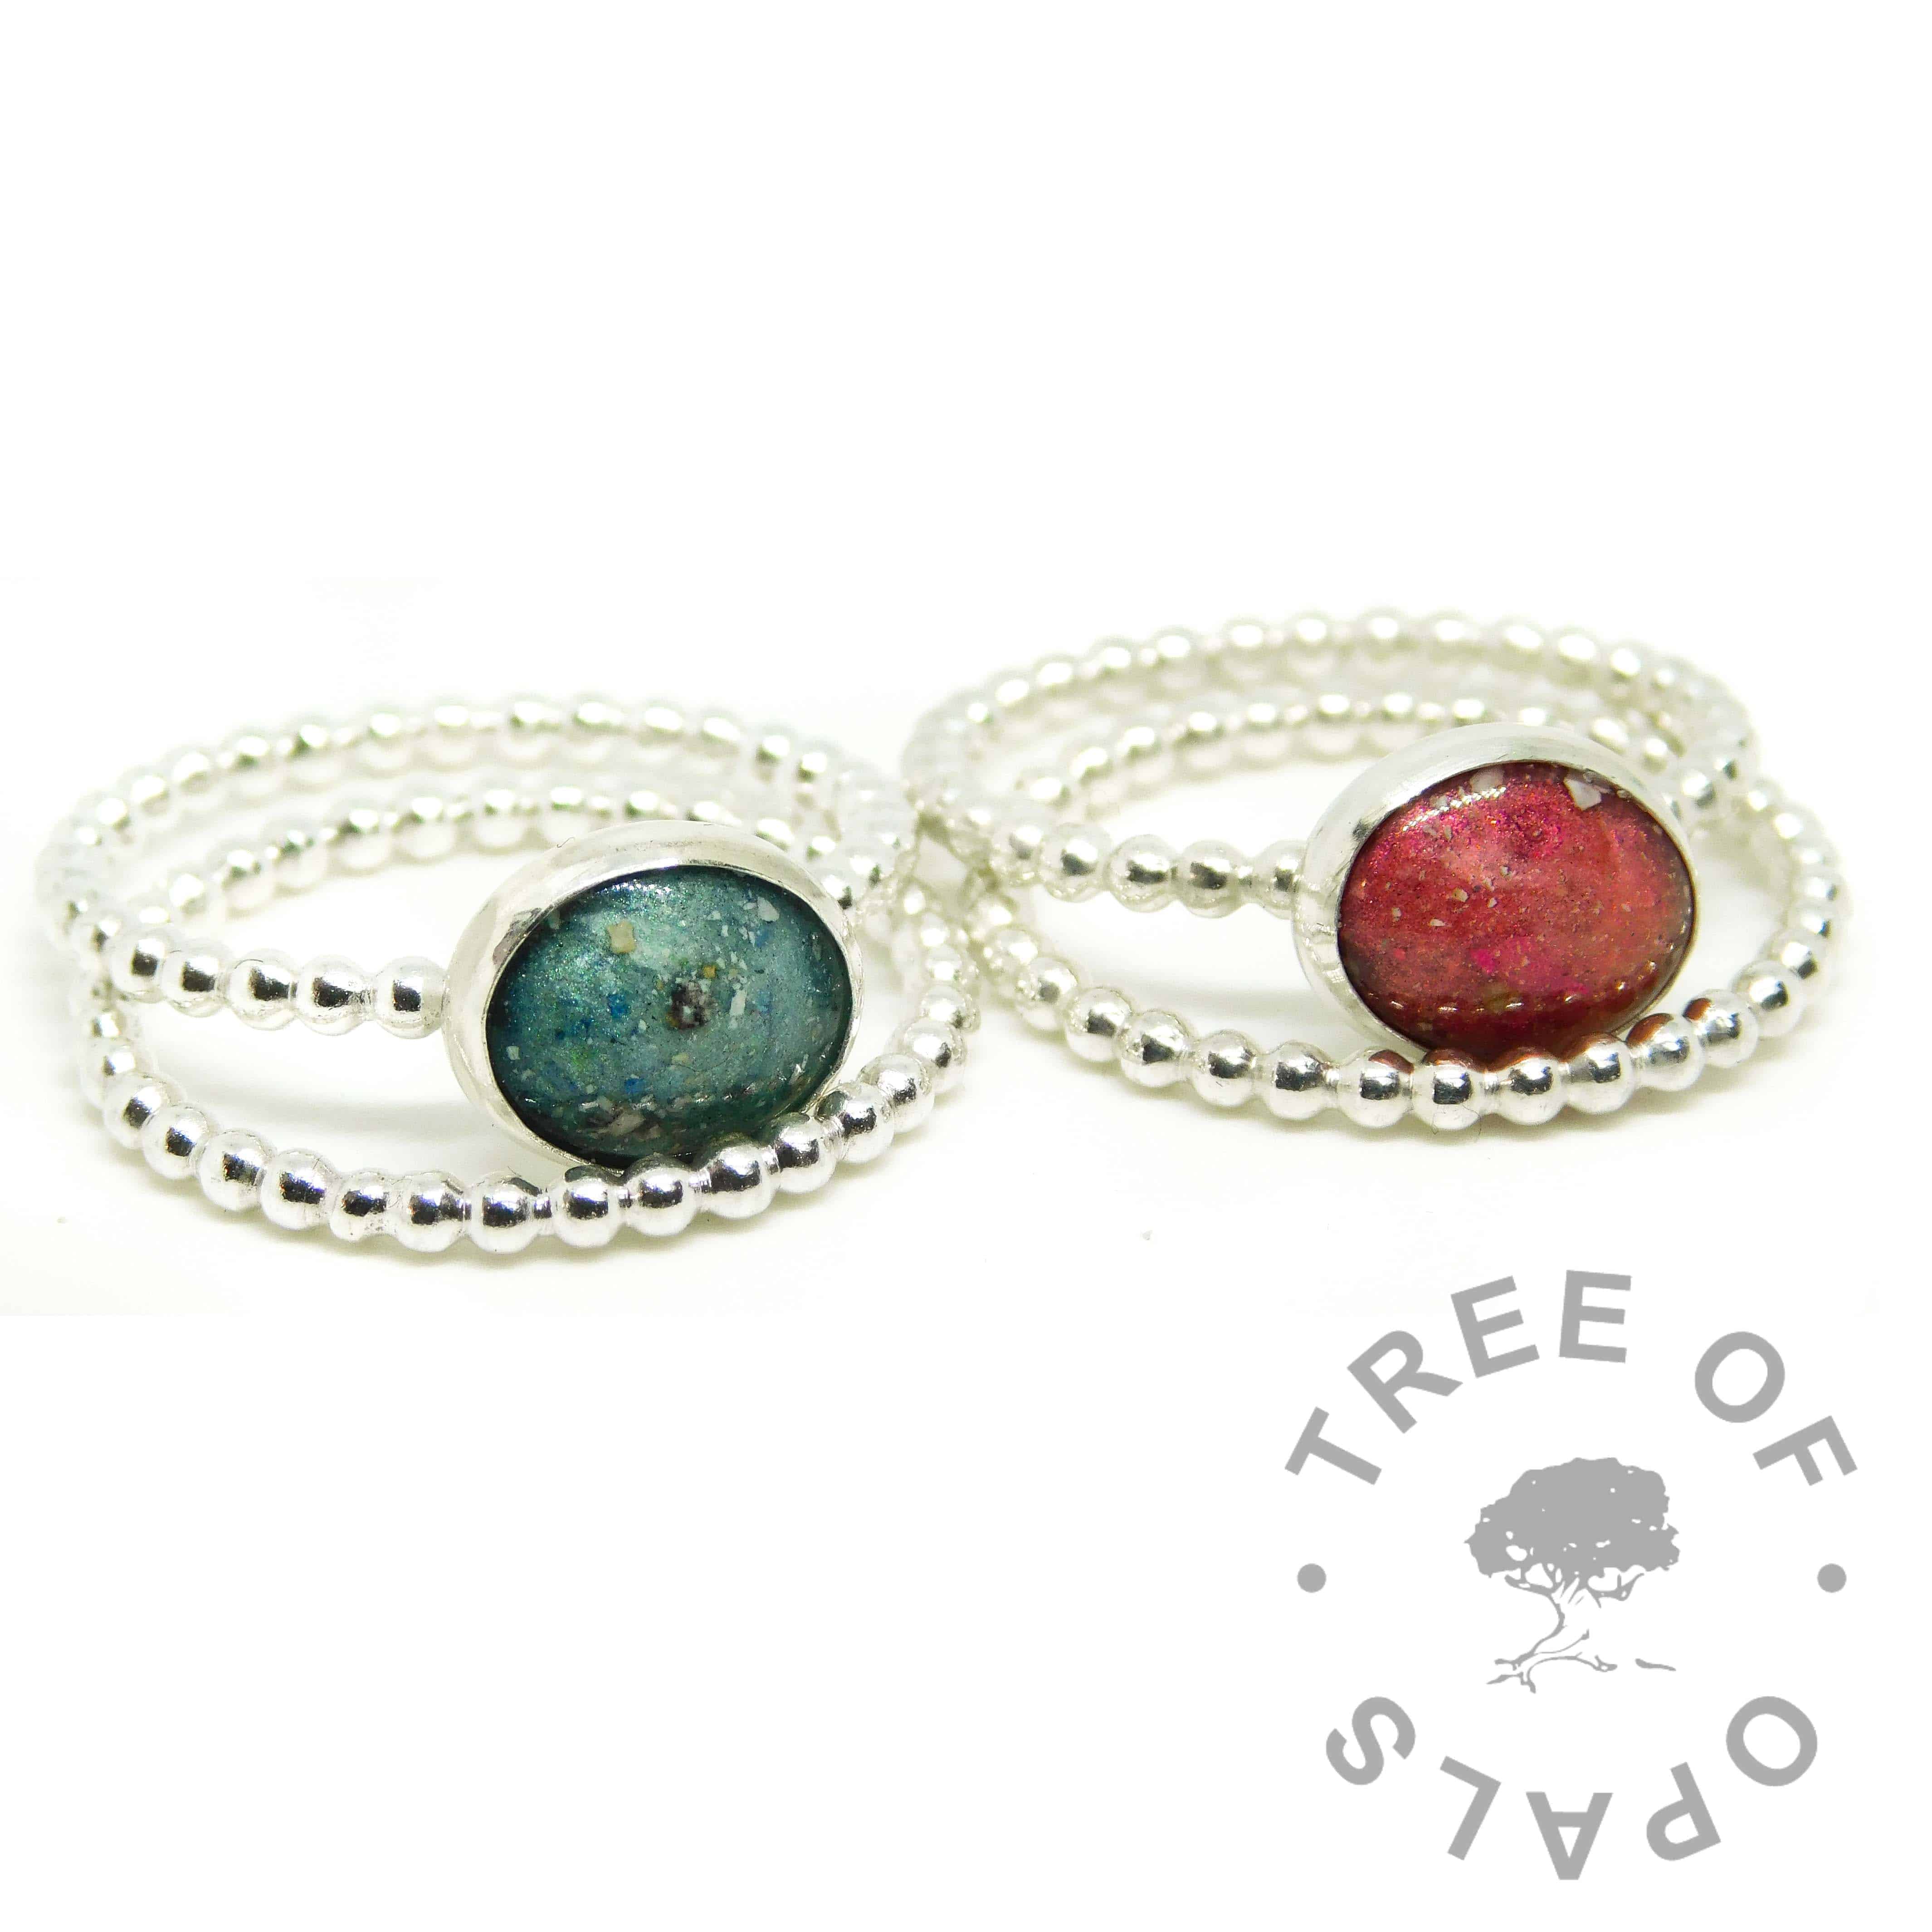 red and teal ashes ring duo, dragon's blood red and mermaid teal resin sparkle mixes, bubble wire Argentium silver bands. Shown with bubble wire slim stacking bands